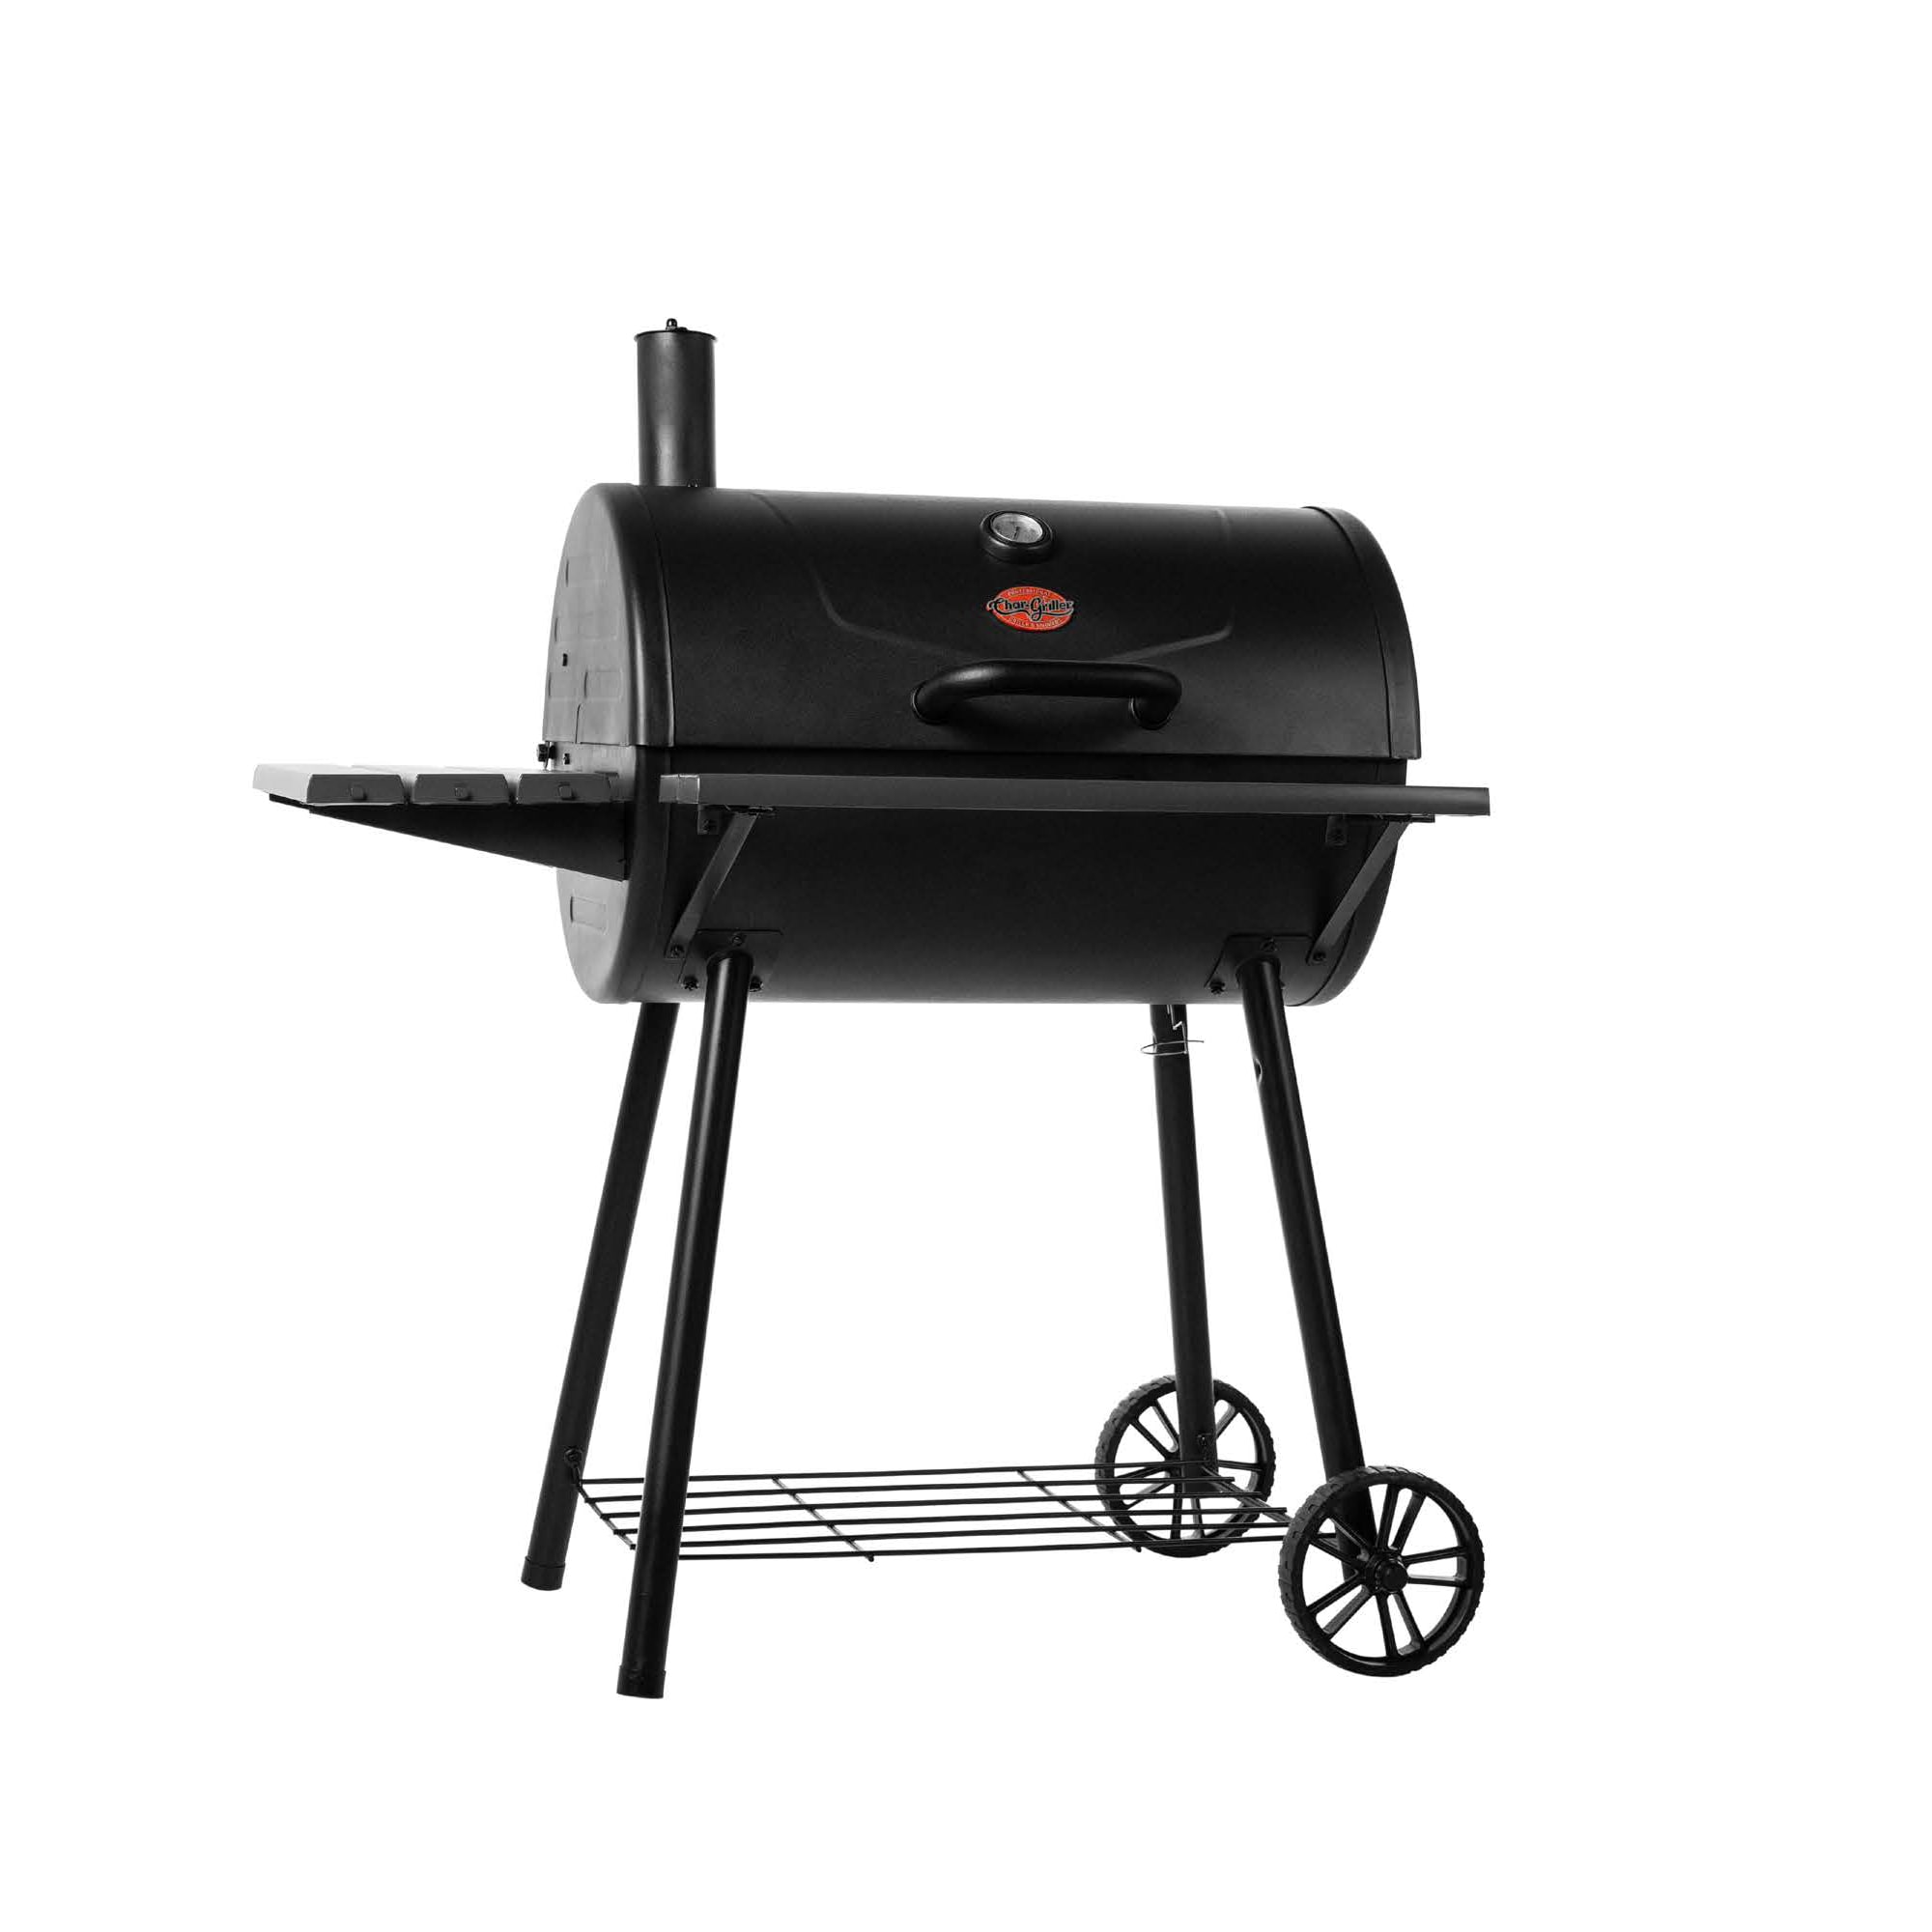 Wrangler® Charcoal Grill, Classic - Char-Griller